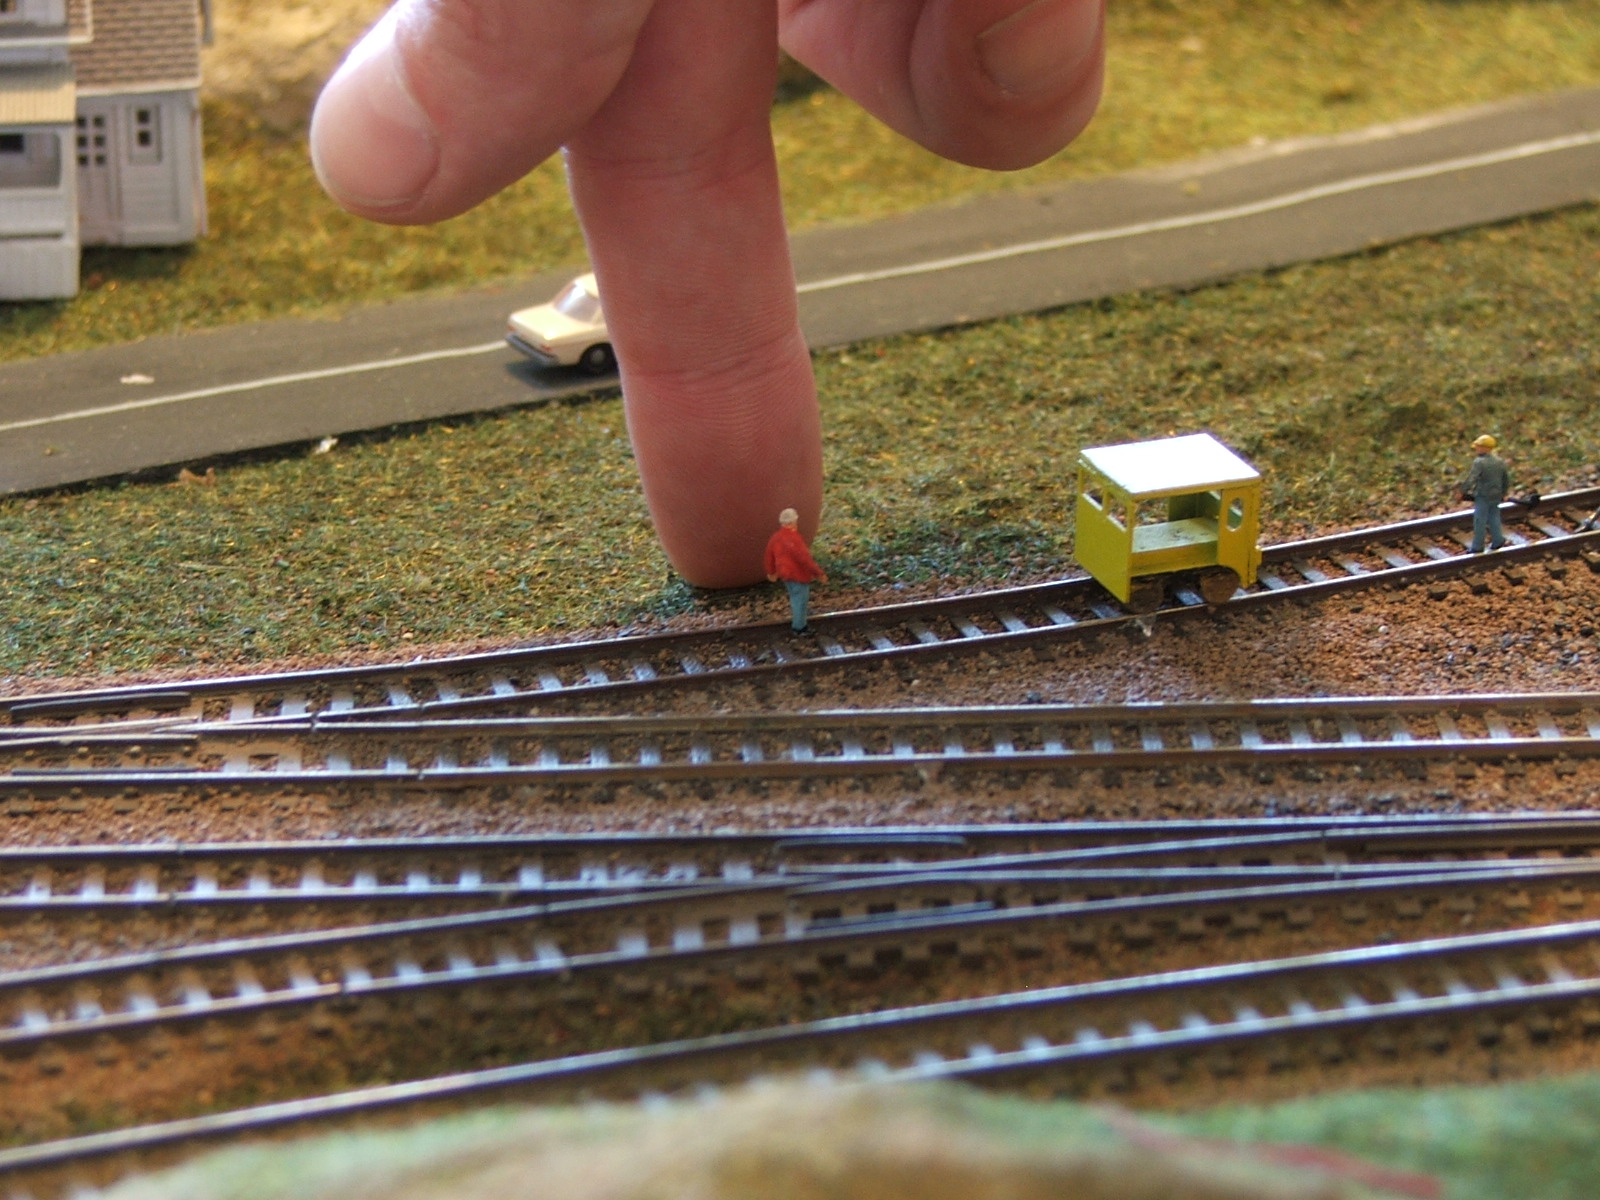 Photo of section of N scale layout with track and a human hand shown 